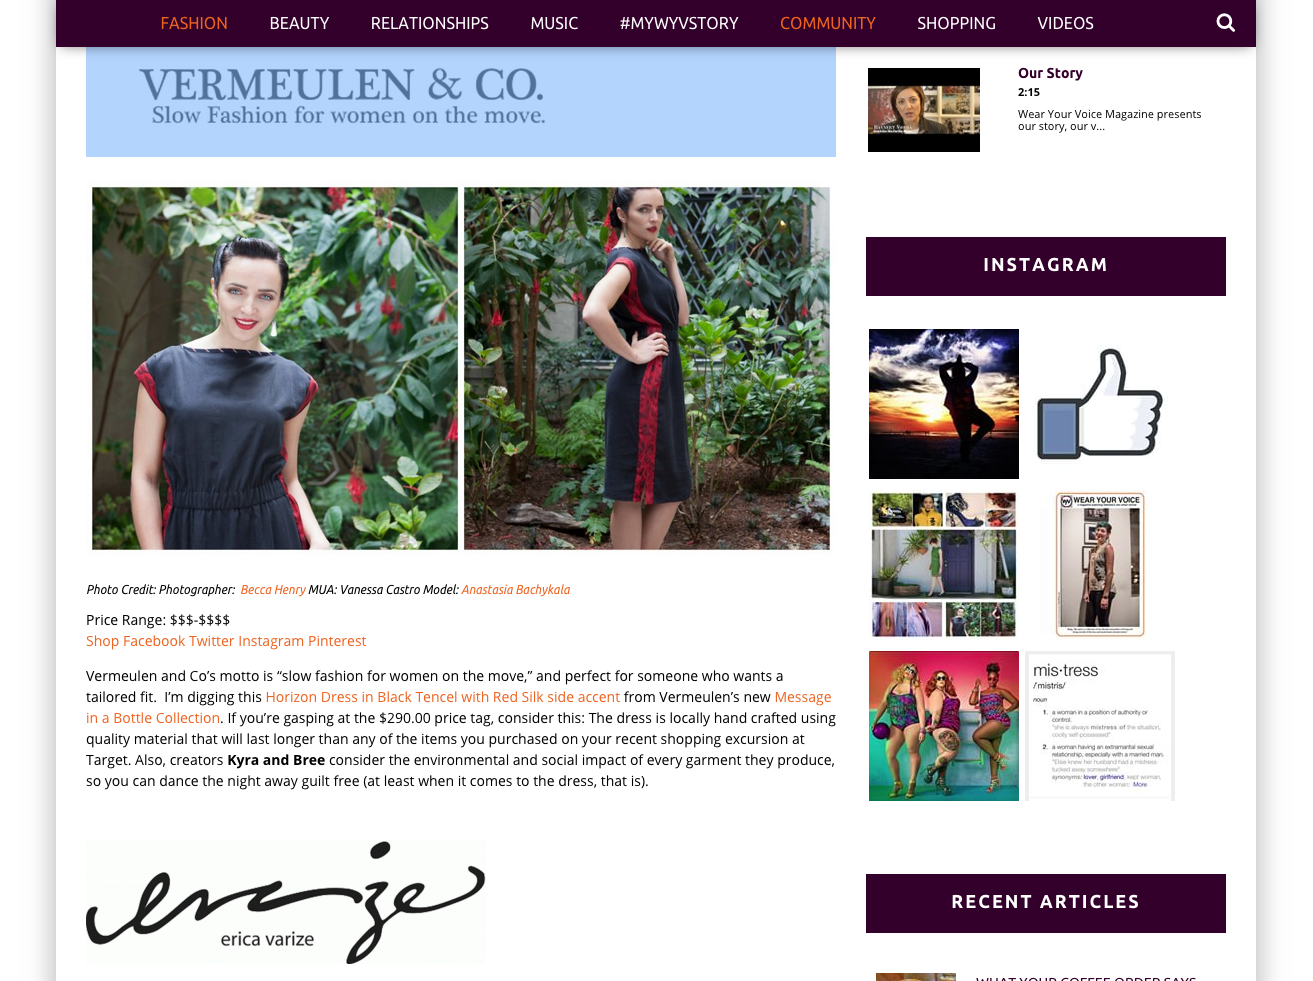 Becca Henry Fashion Photography - Article about Vermeulen& Co